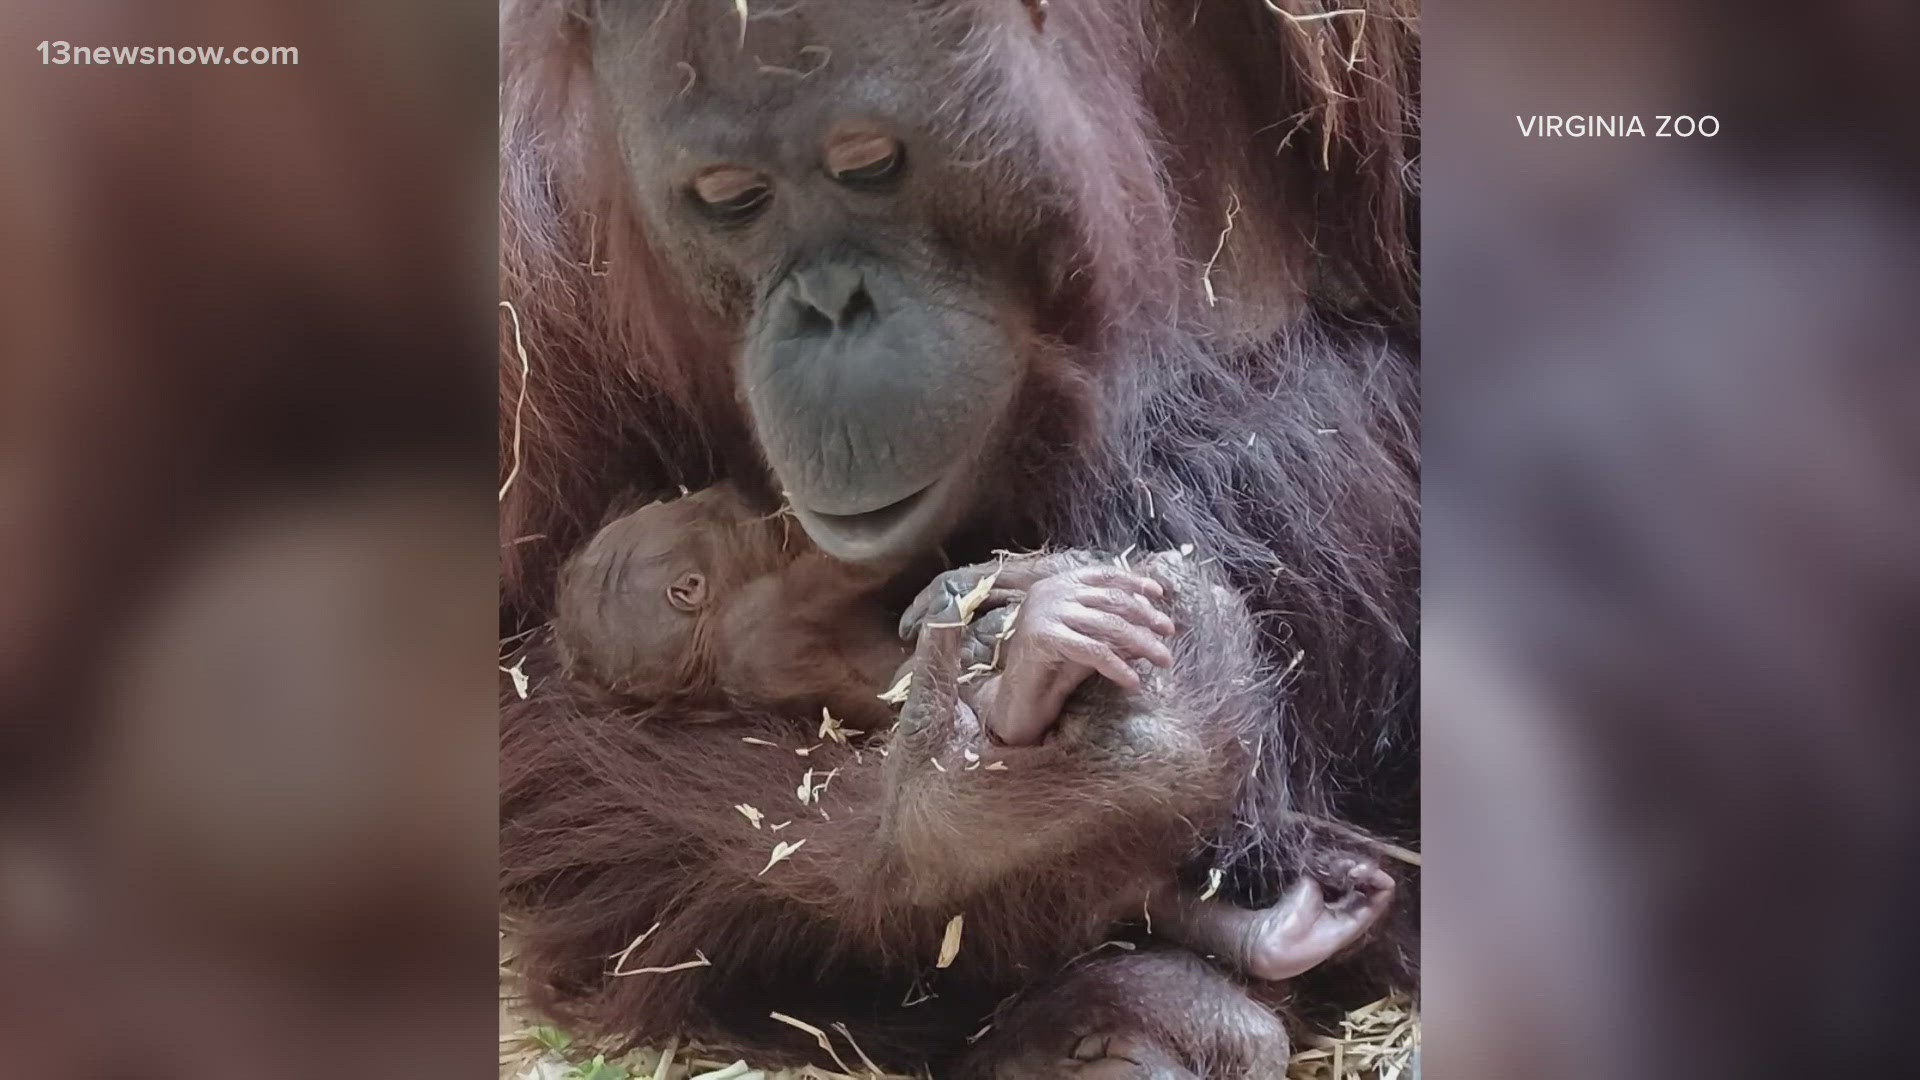 A critically endangered Bornean orangutan was born there over the weekend.